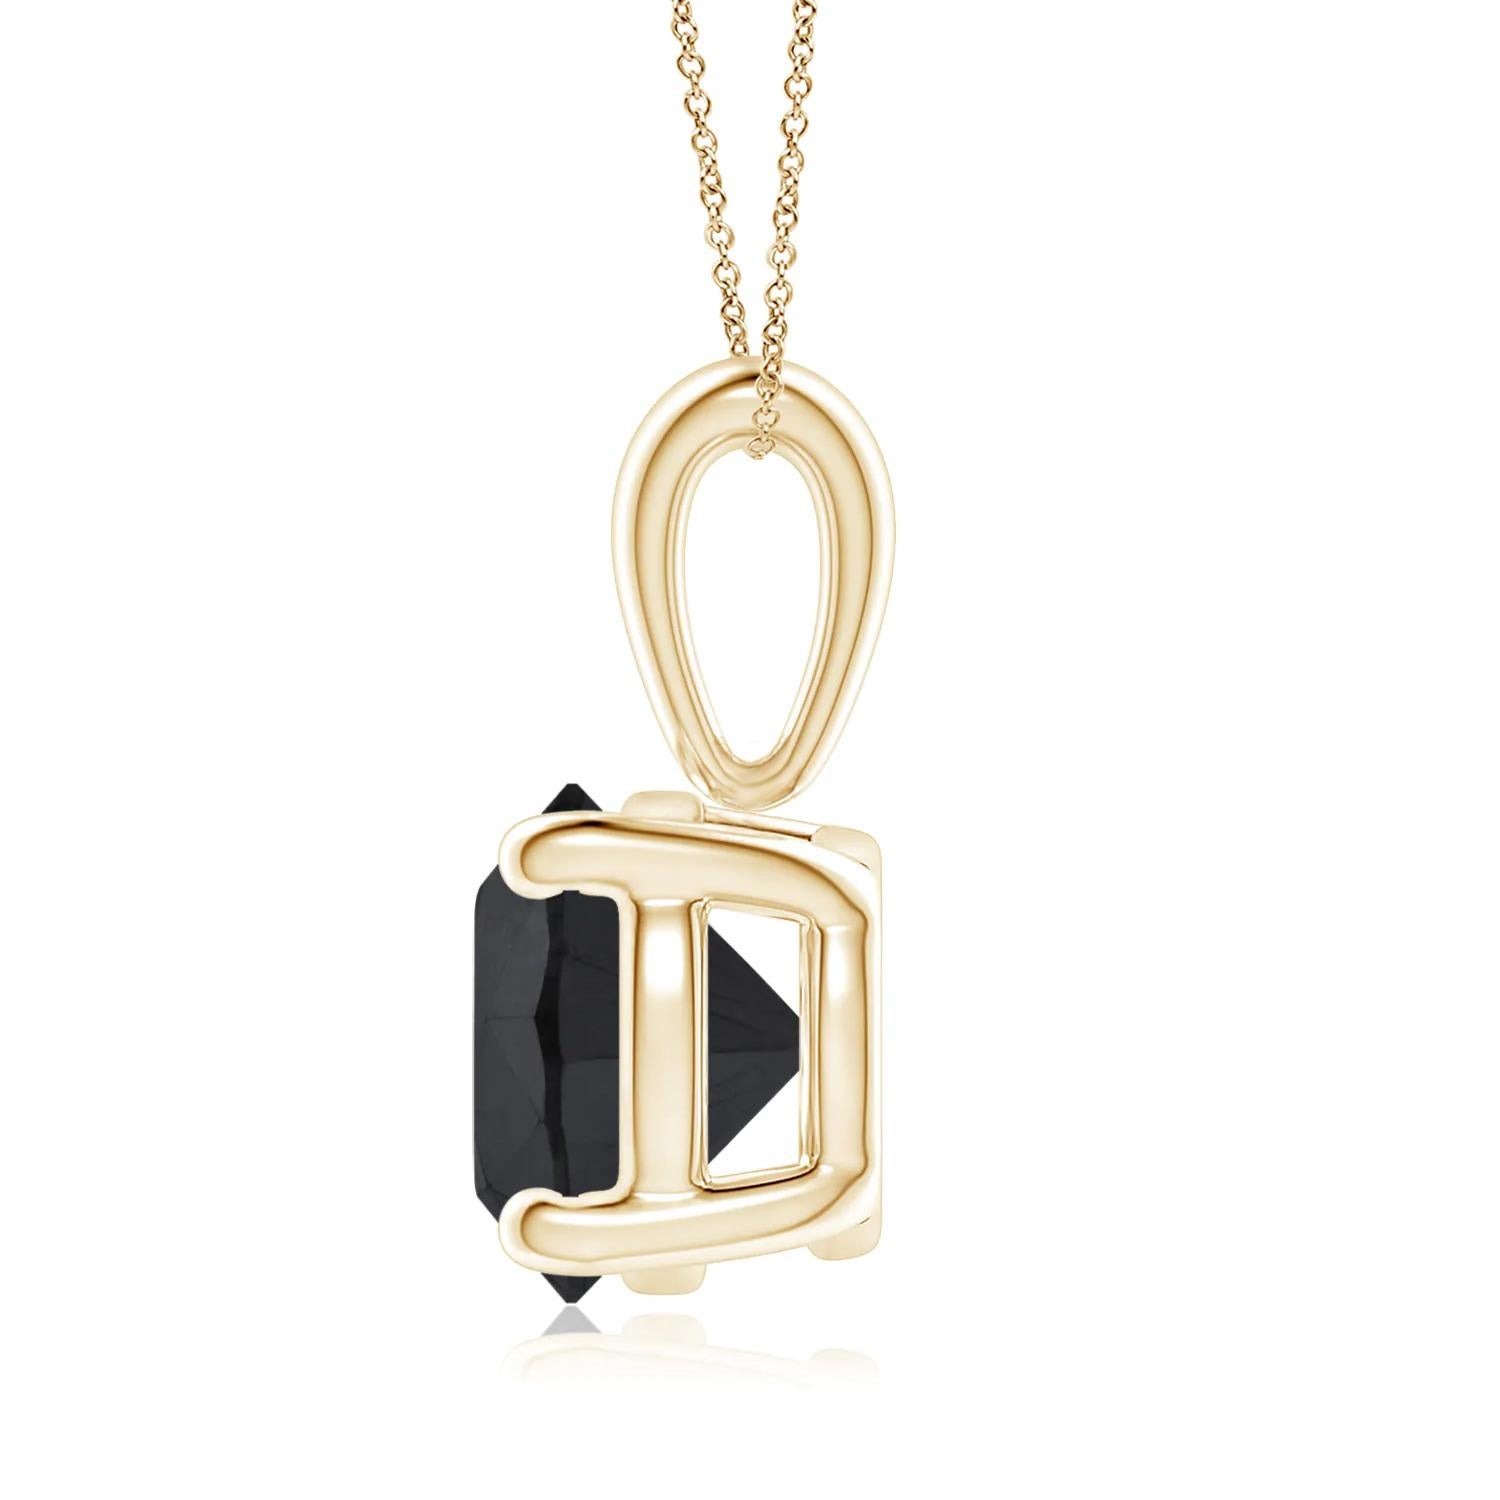 Round Cut 1.76 Carat Round Black Diamond Solitaire Pendant Necklace in 14K Yellow Gold